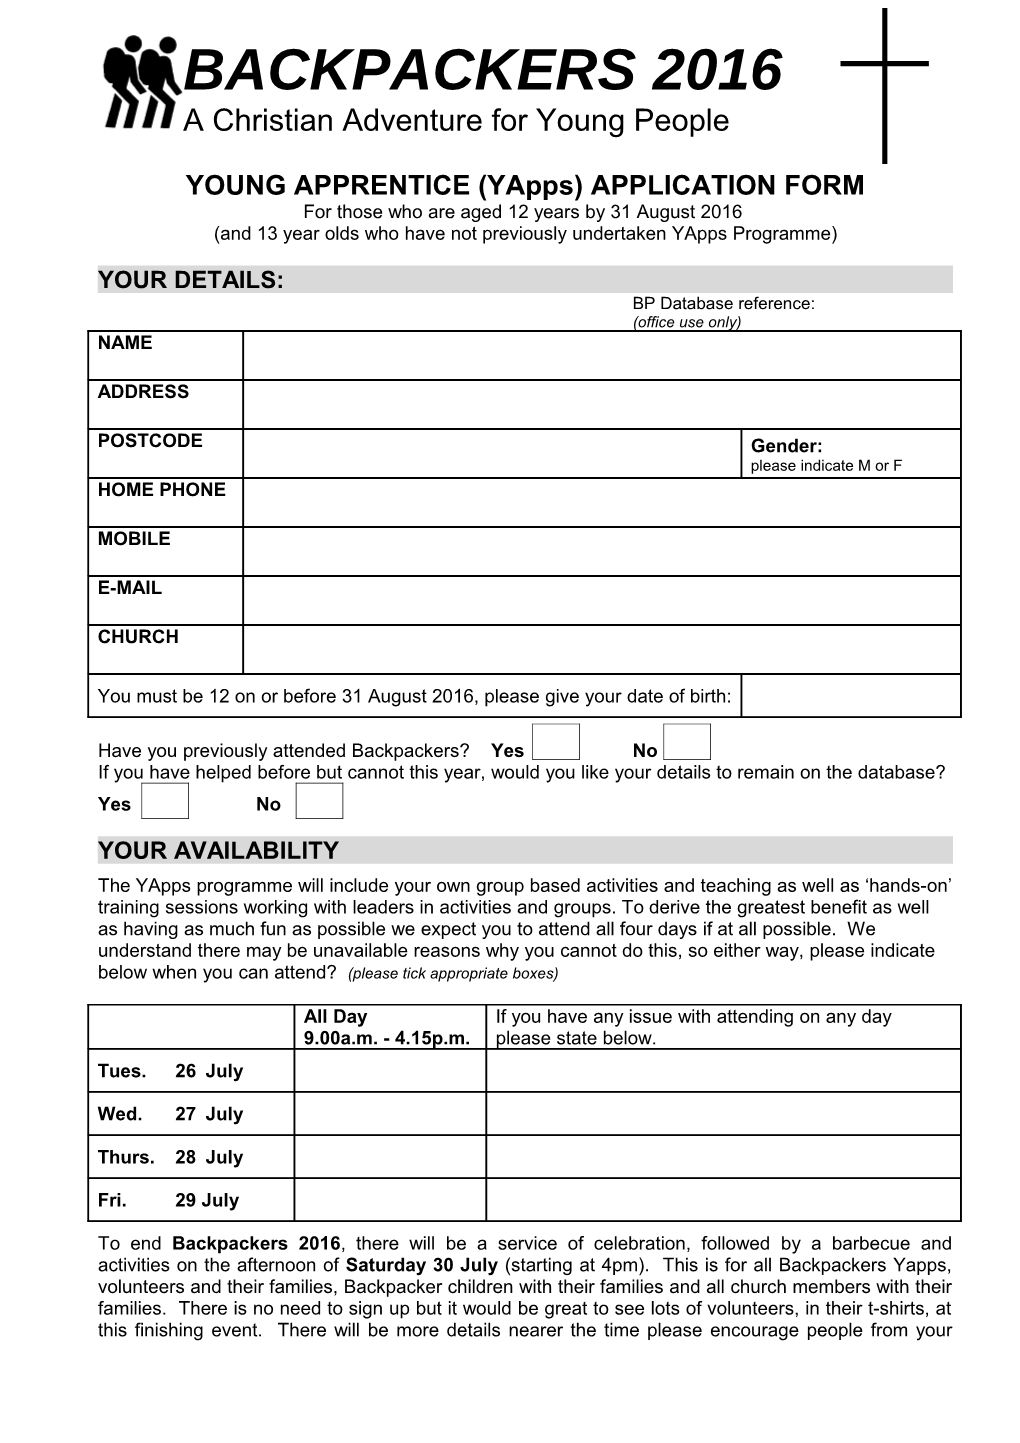 YOUNG APPRENTICE (Yapps) APPLICATION FORM